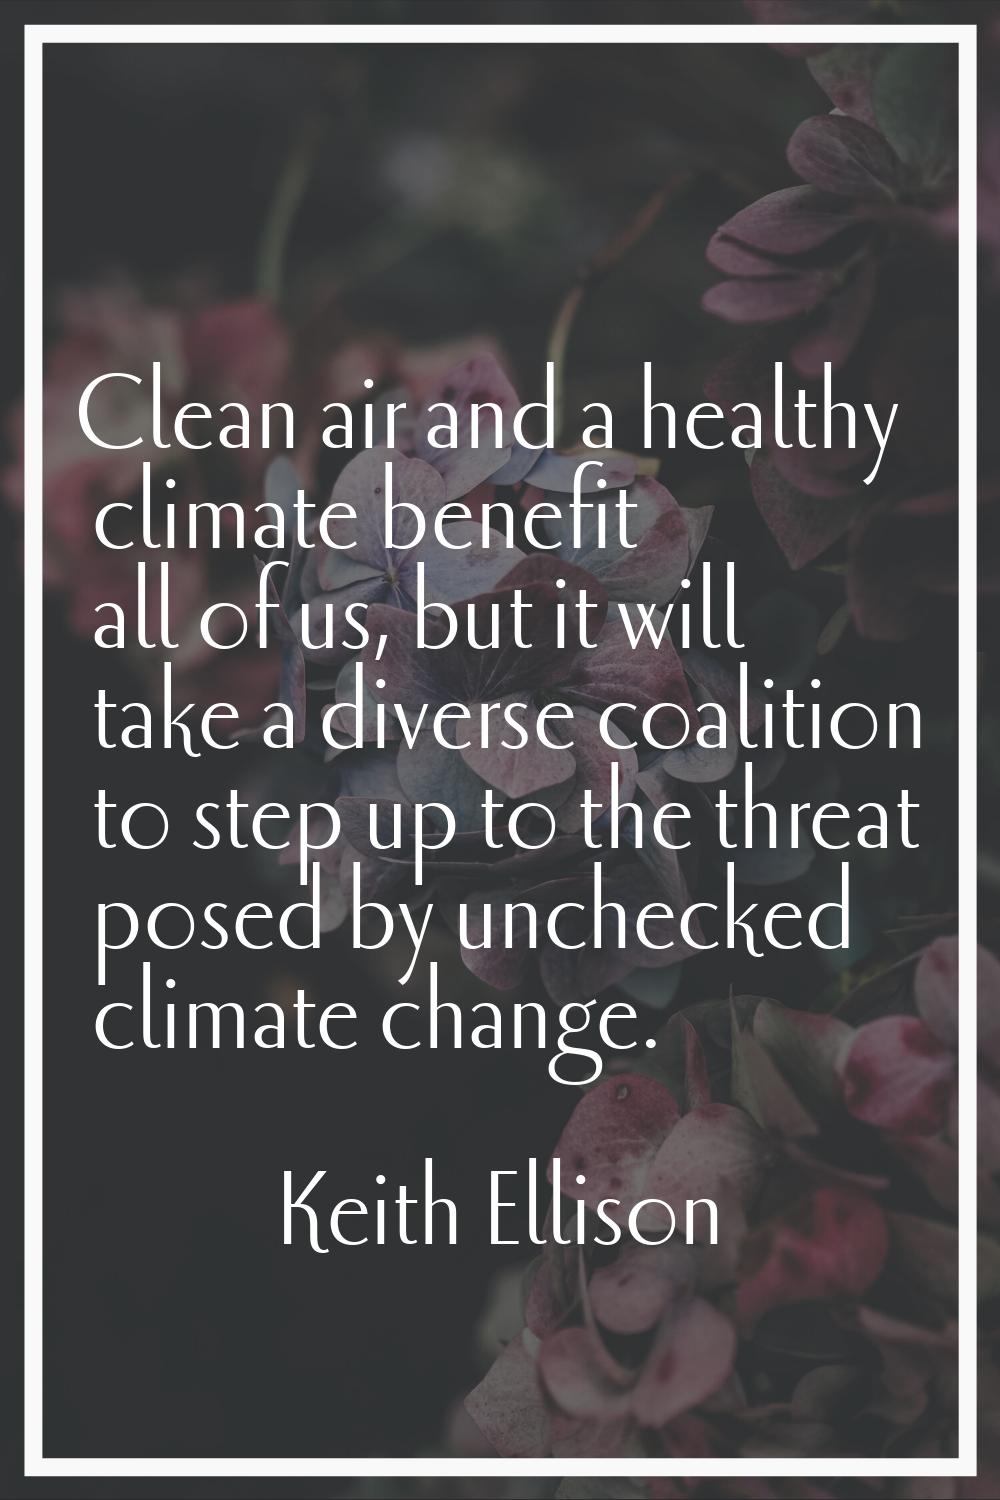 Clean air and a healthy climate benefit all of us, but it will take a diverse coalition to step up 